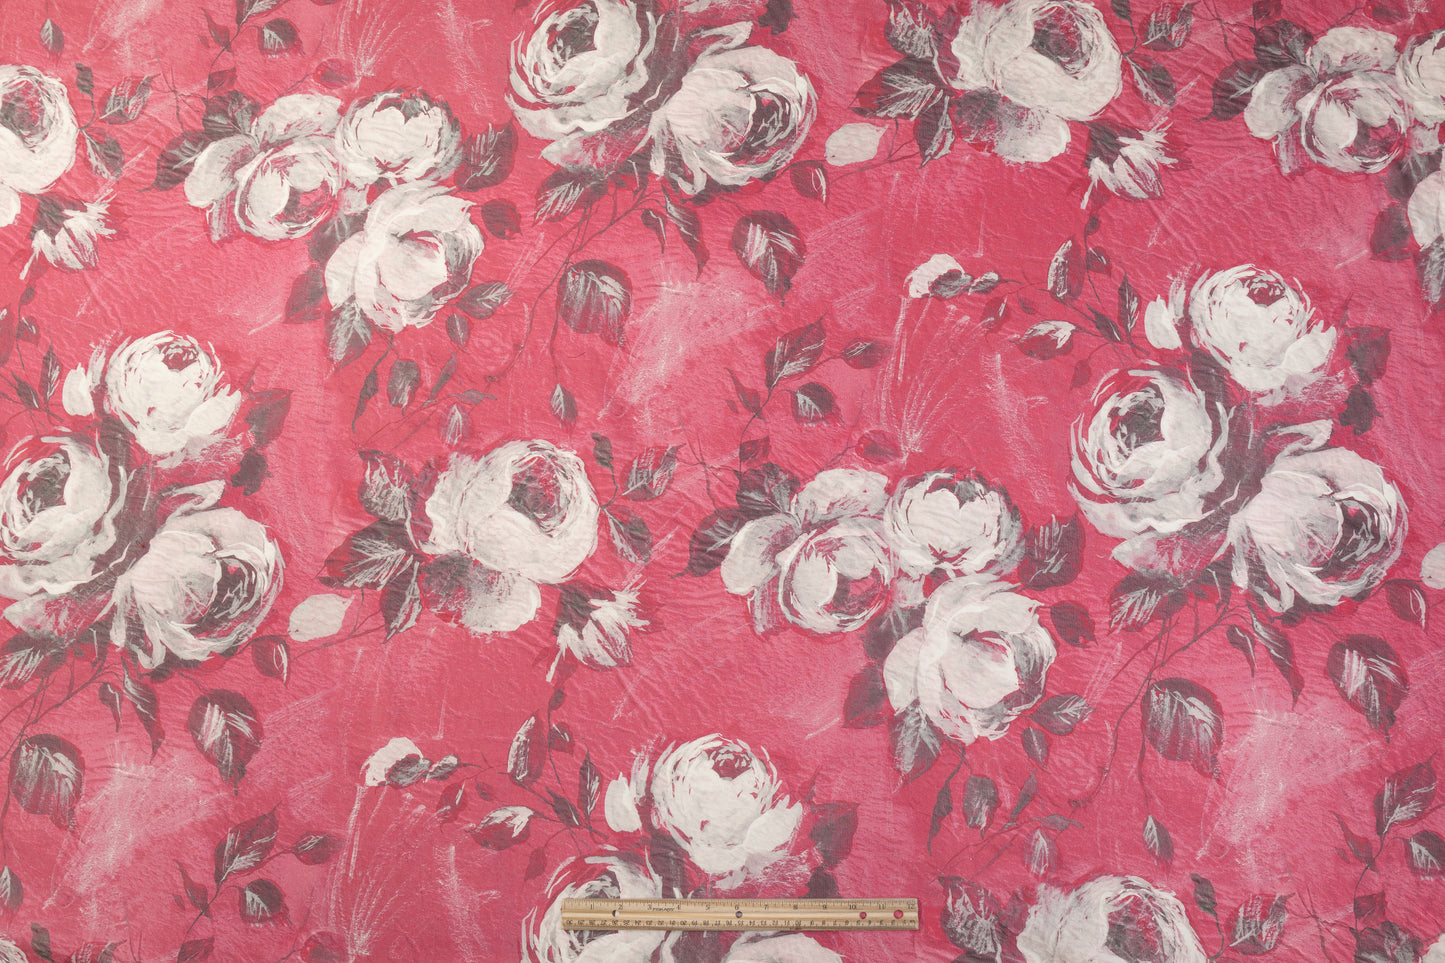 Floral Italian Cotton - Rose Pink